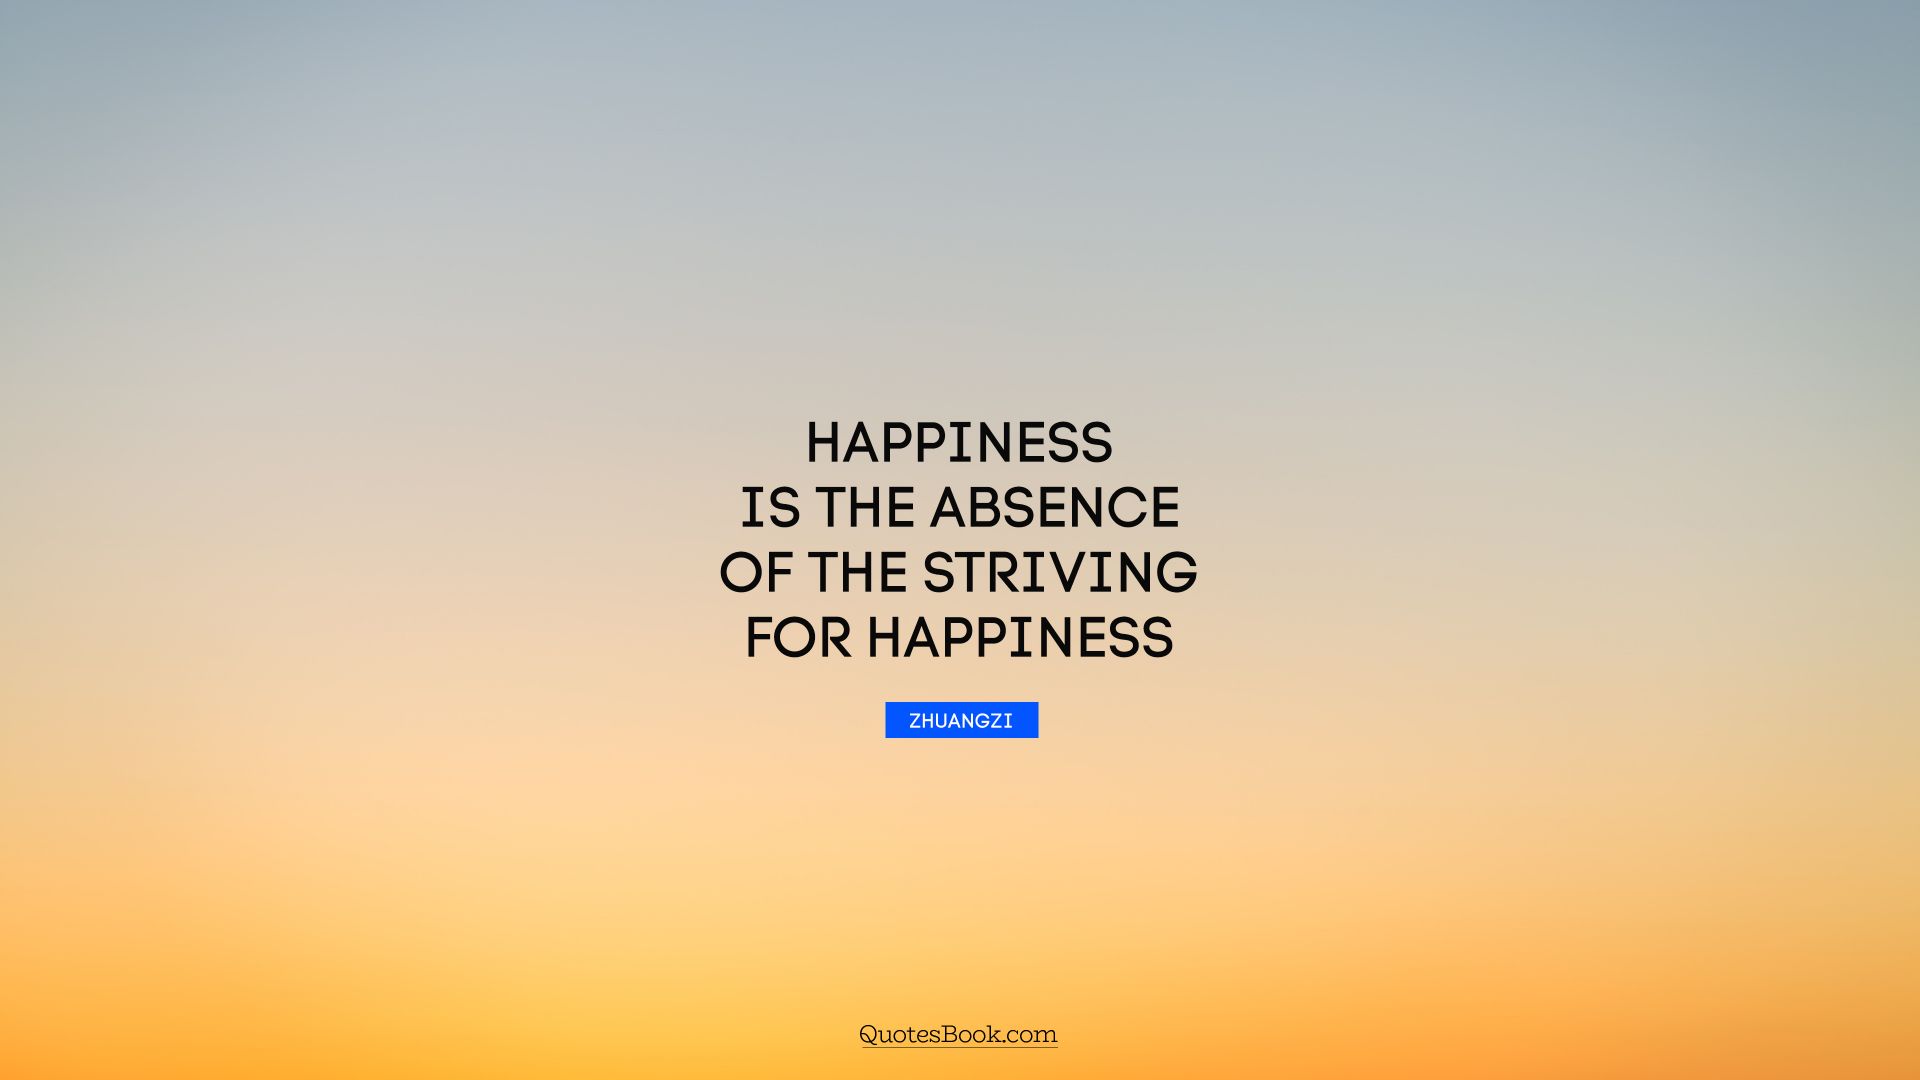 Happiness is the absence of the striving for happiness. - Quote by Zhuangzi